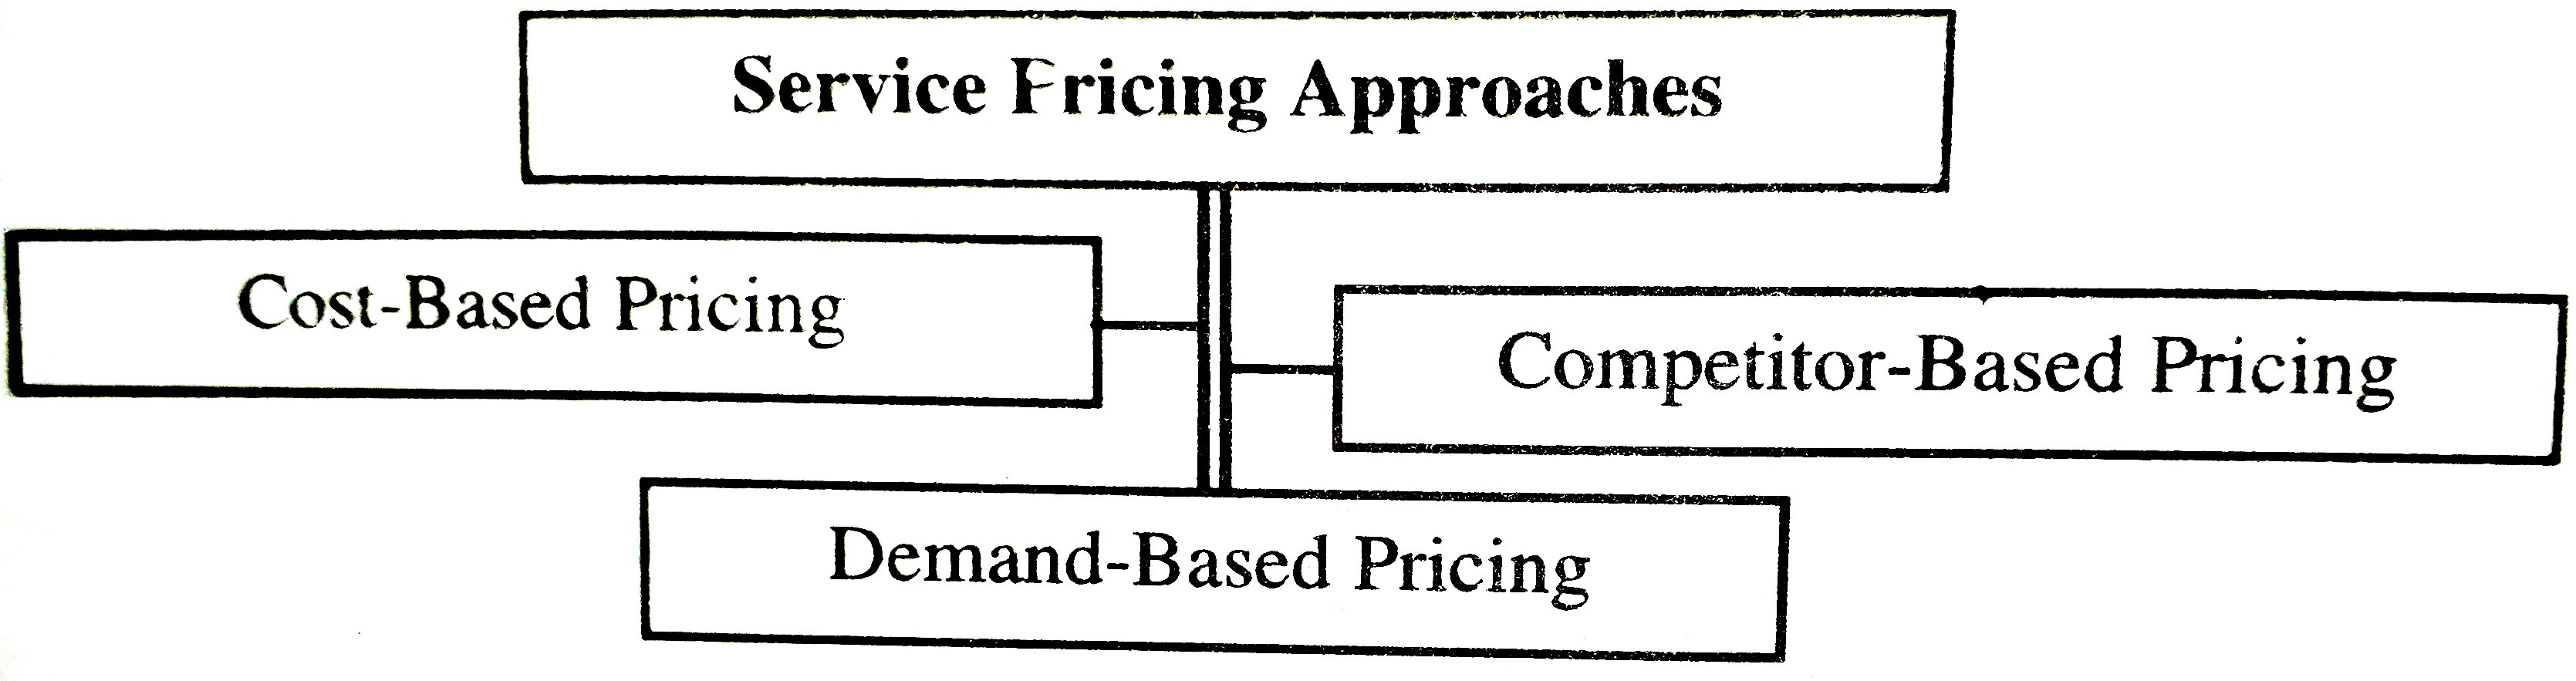 Service Pricing Approaches